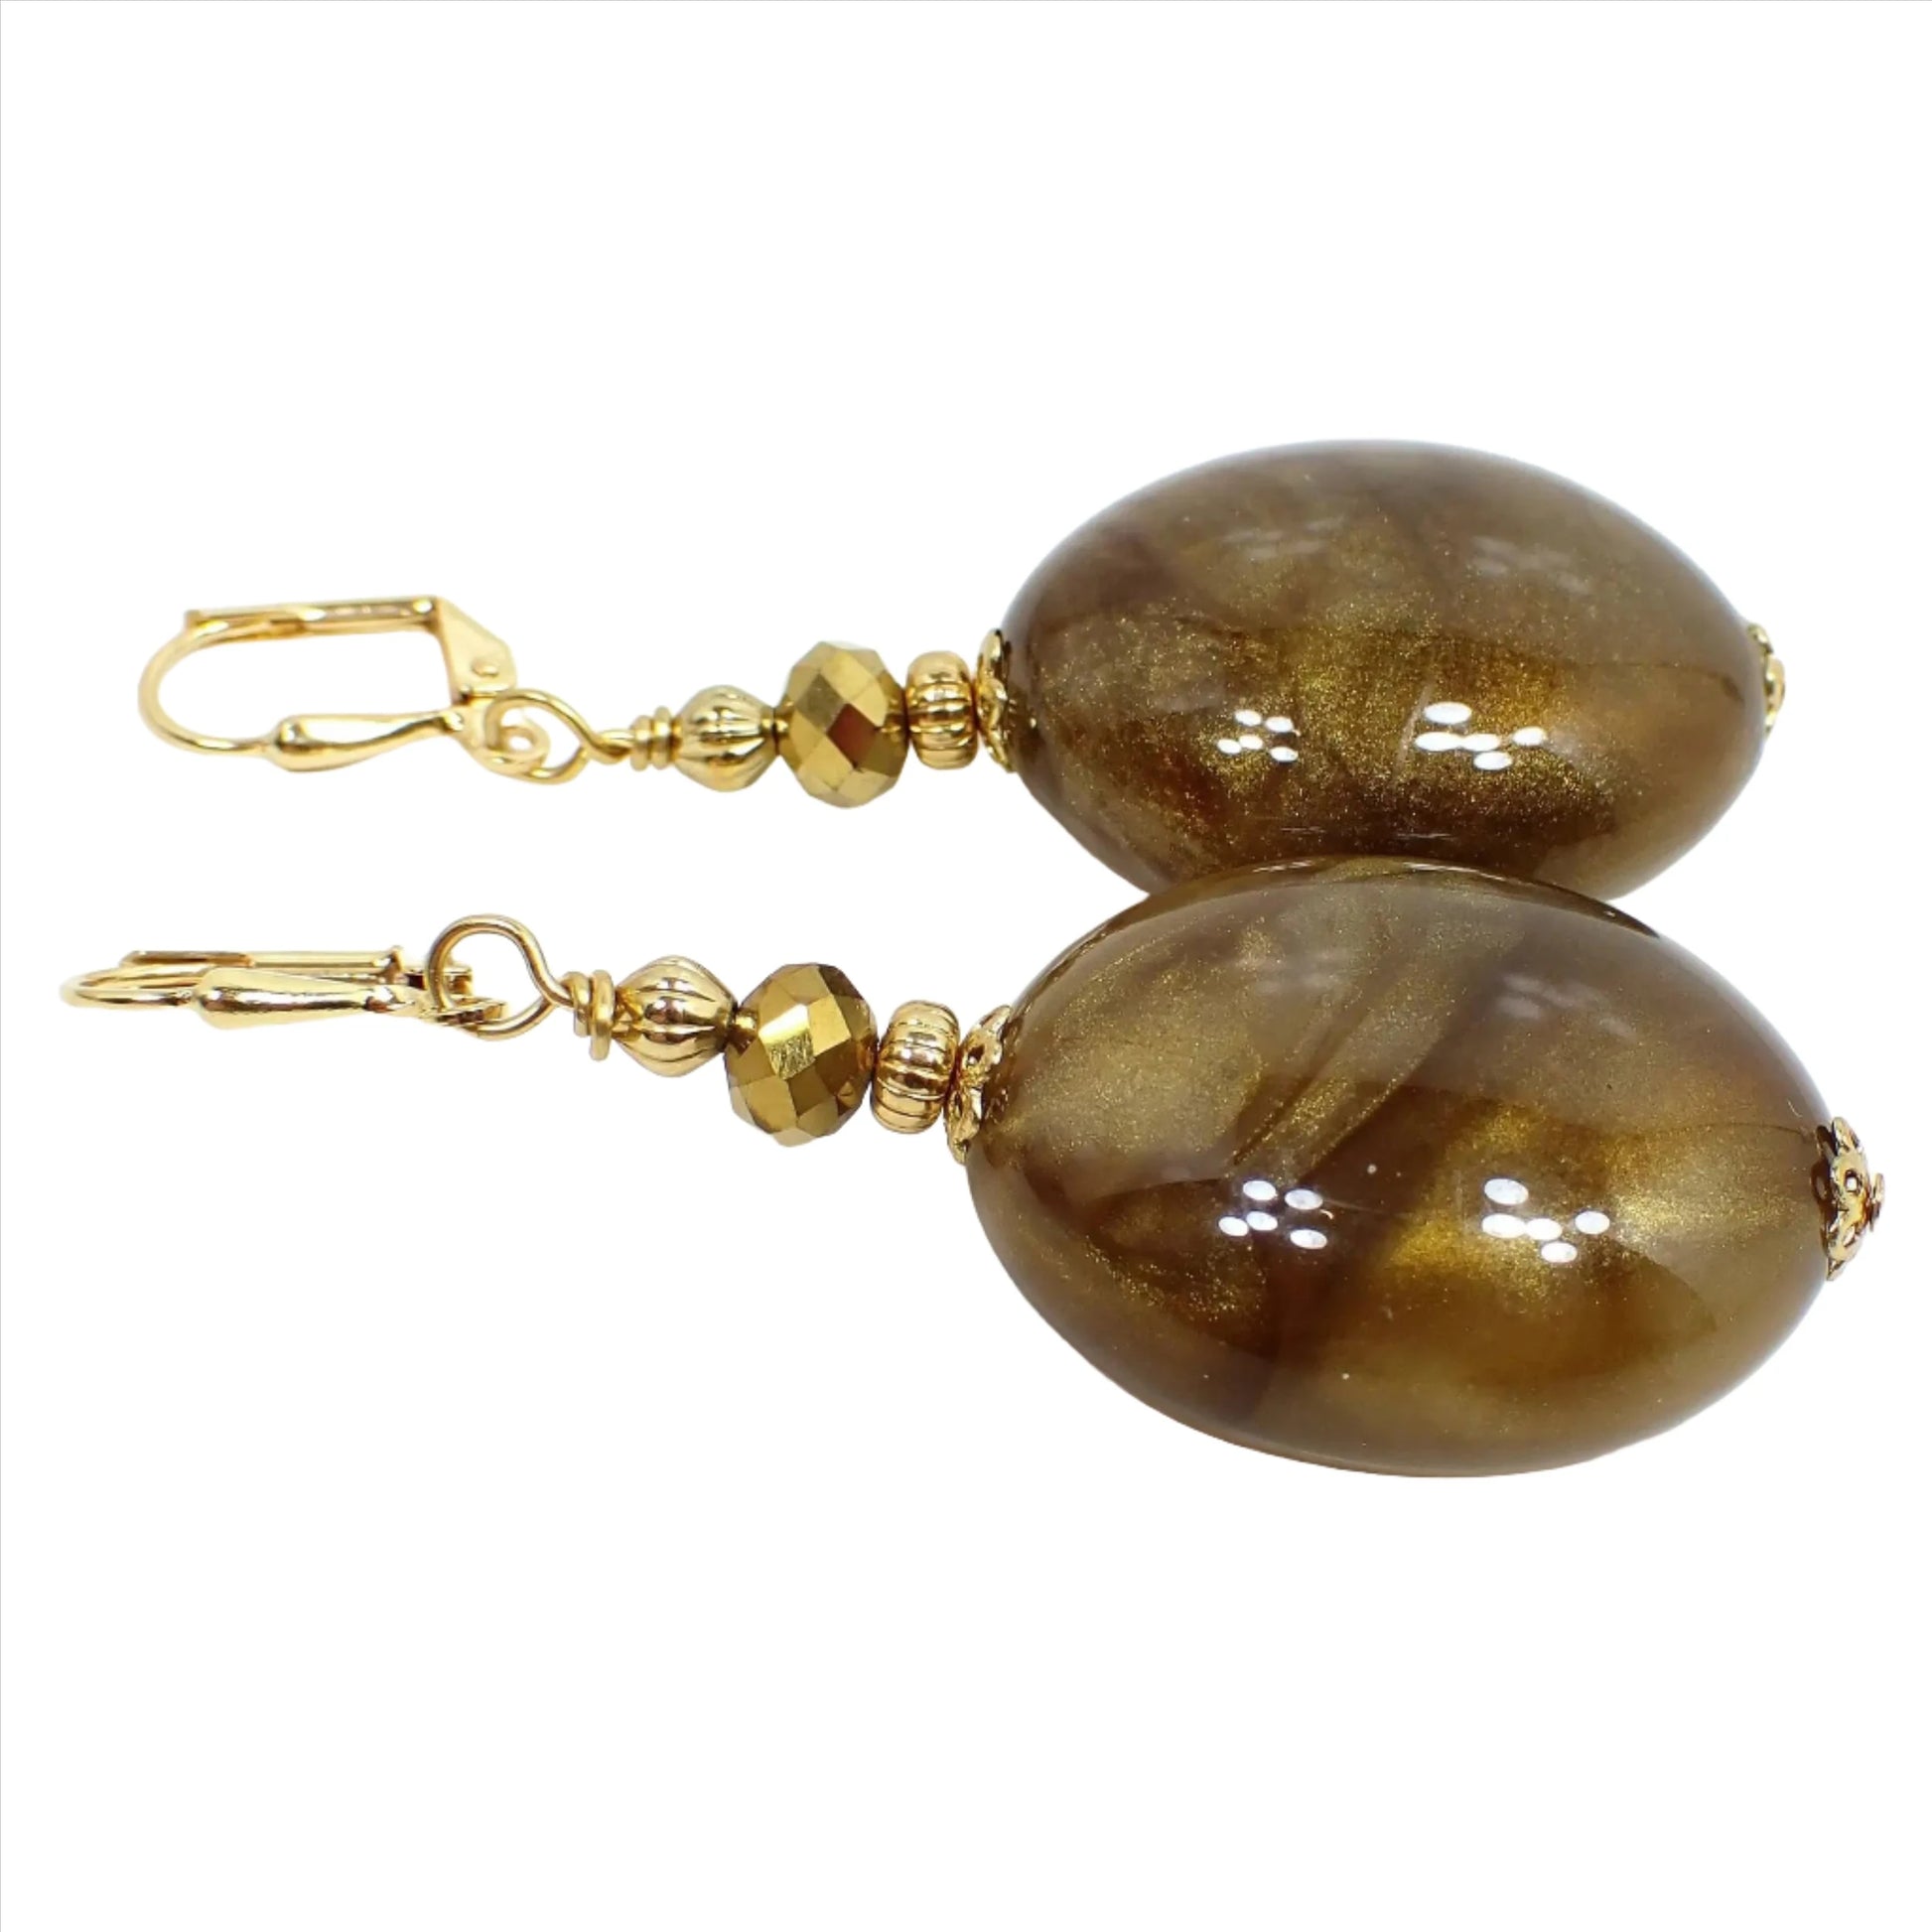 Angled view of the big oval handmade drop earrings with vintage lucite beads. The metal is gold plated in color. There are faceted metallic bronze glass beads at the top. The bottom beads are large puffy ovals that have marbled swirls in different shades of pearly golden brown.